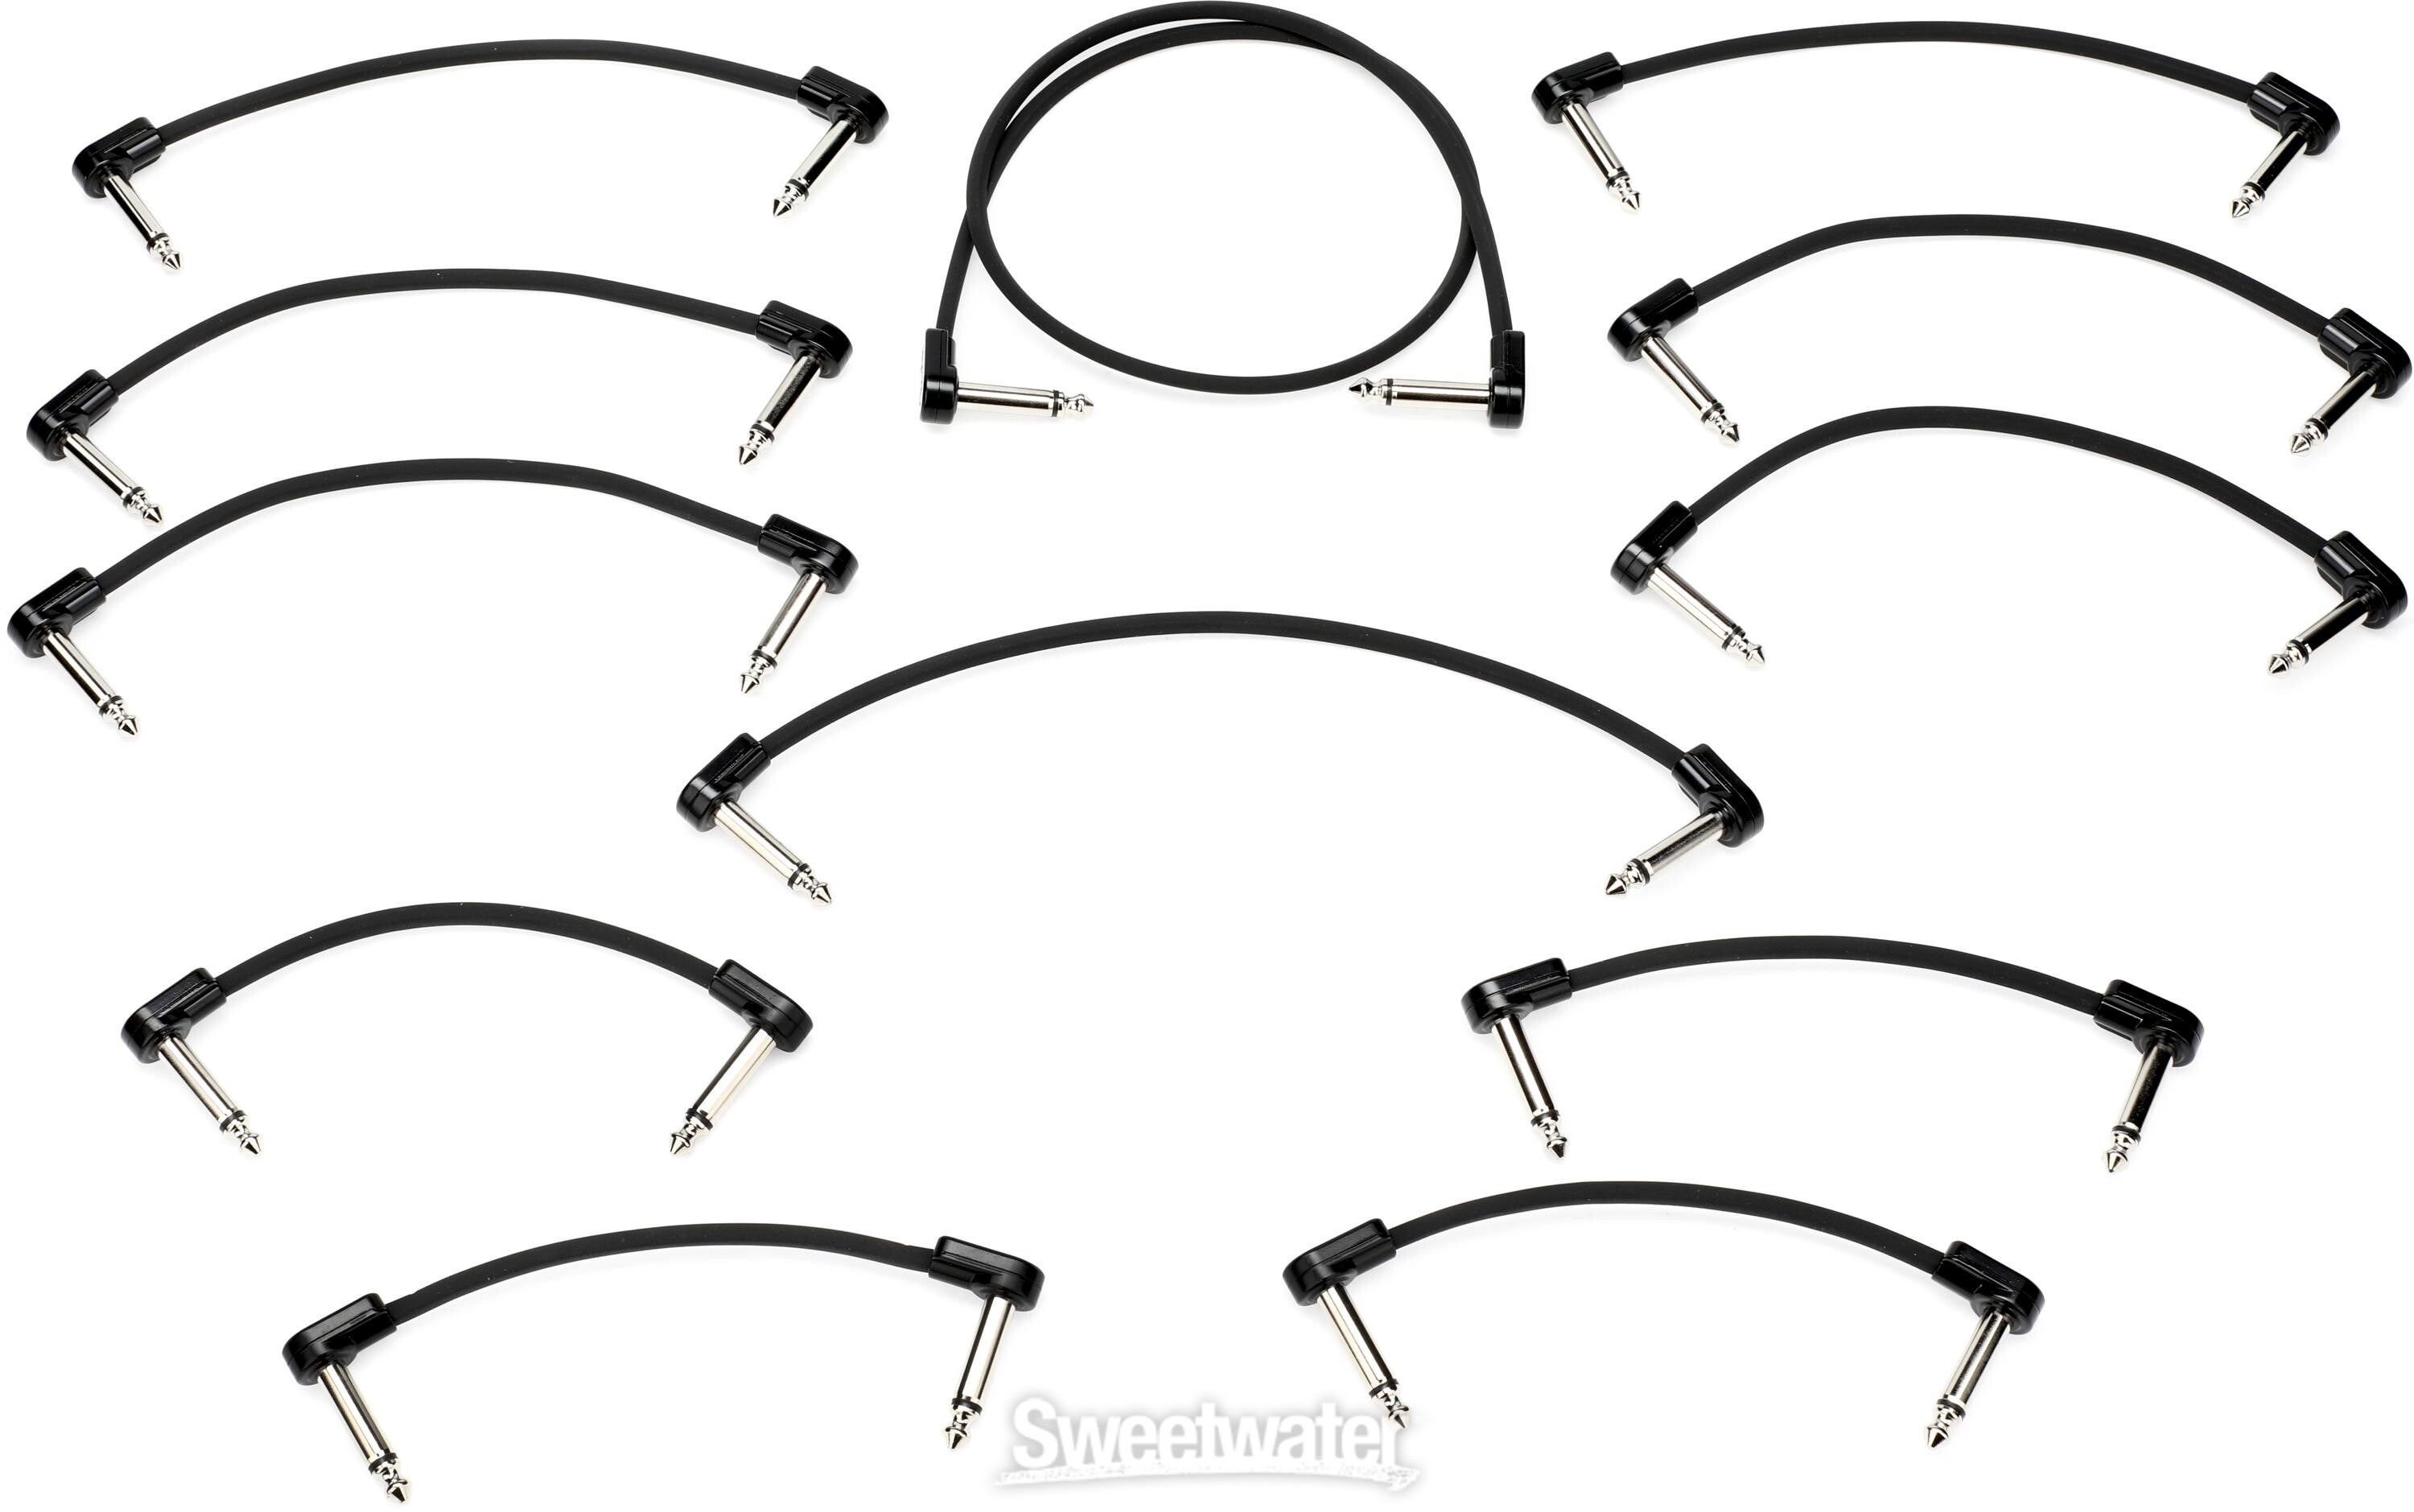 Fender Blockchain Patch Cable Kit - Right Angle to Right Angle